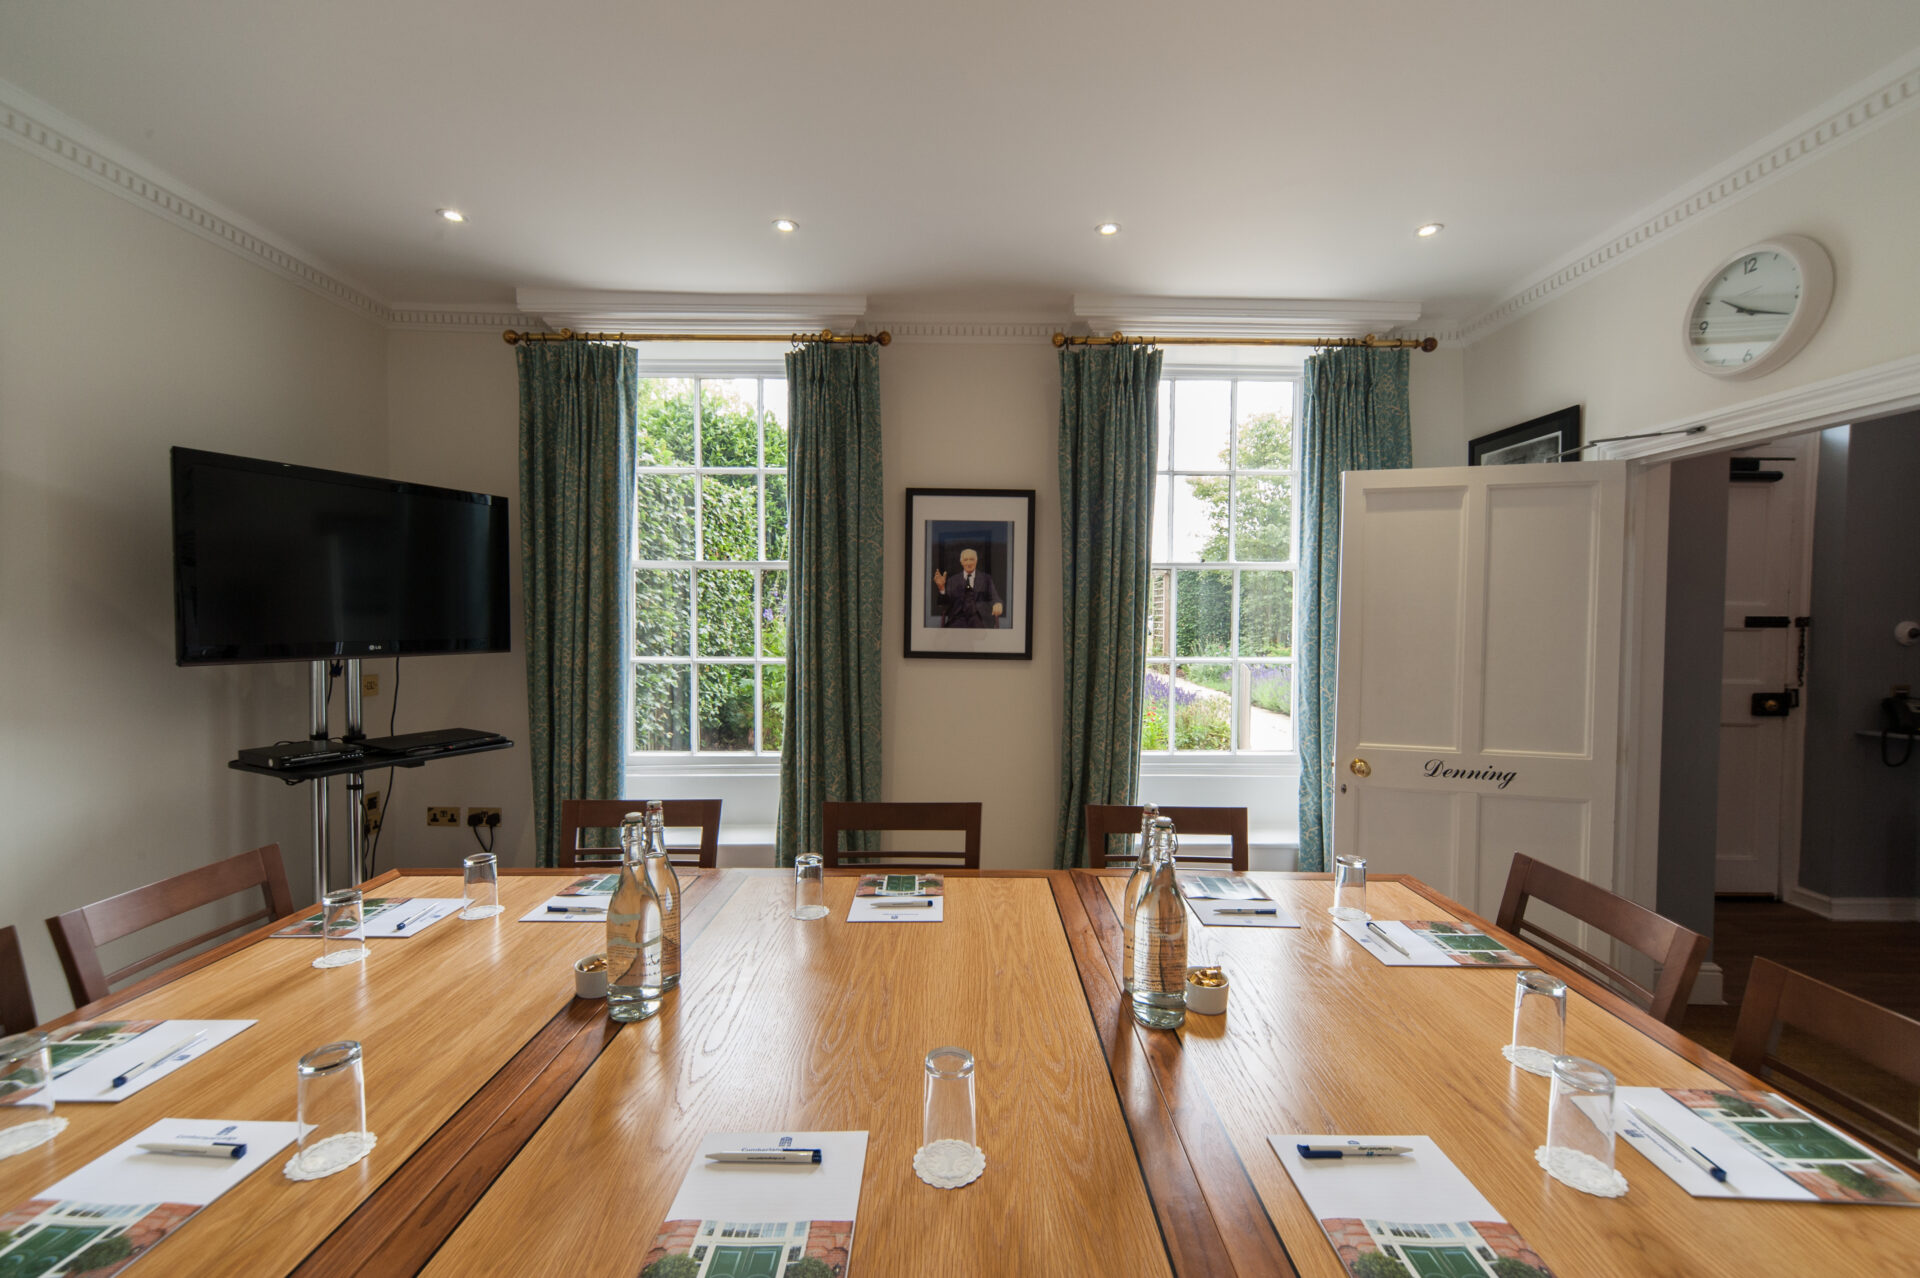 Denning arranged in a boardroom layout